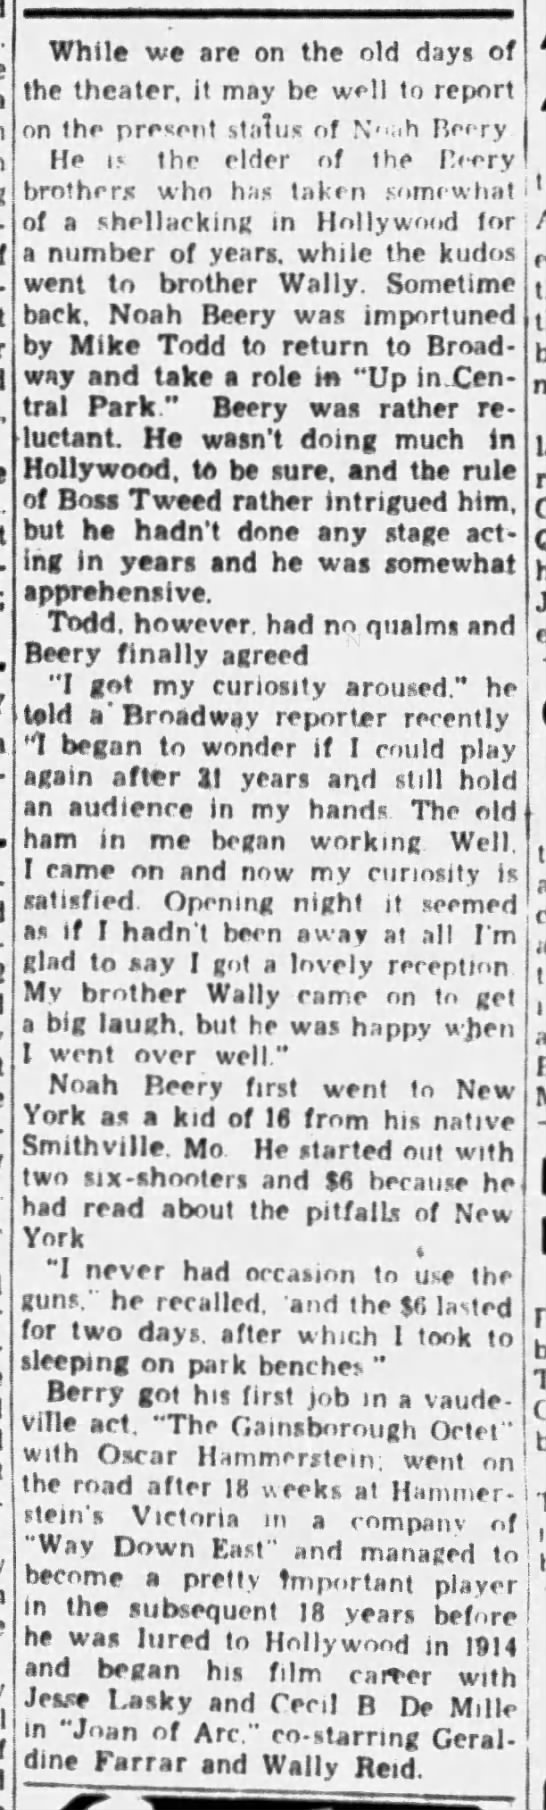 Noah Beery was apprehensive on returning to the stage in the play "Up In Central Park". - 